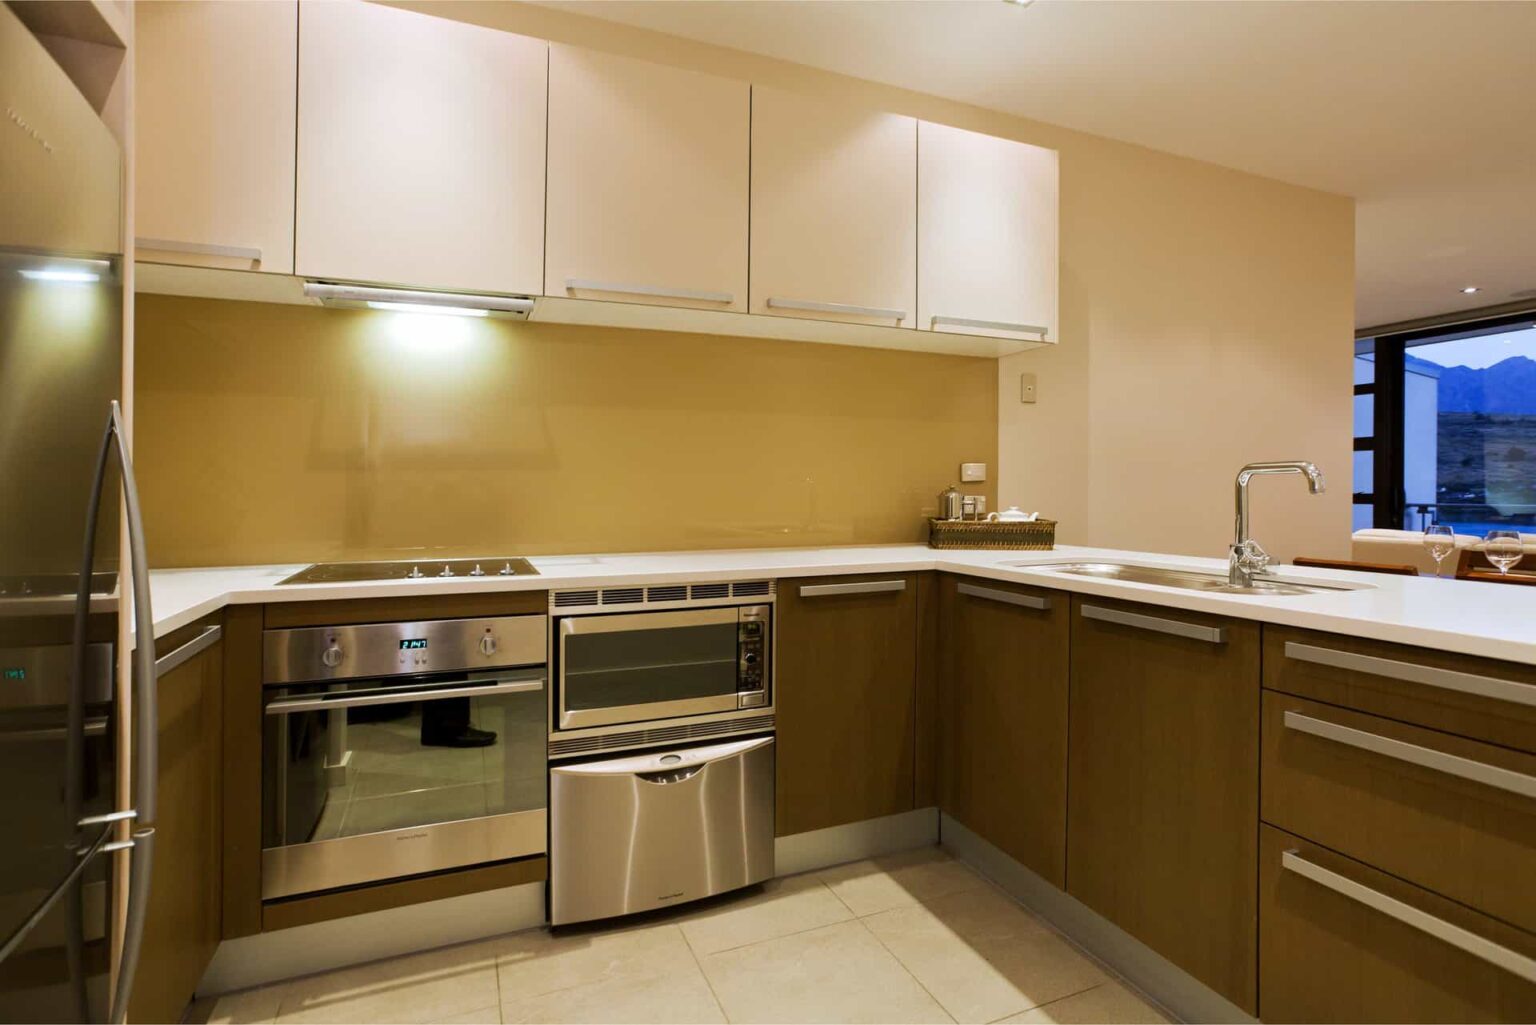 Superior 1 Bedroom Apartment full kitchen with oven range and refrigerator